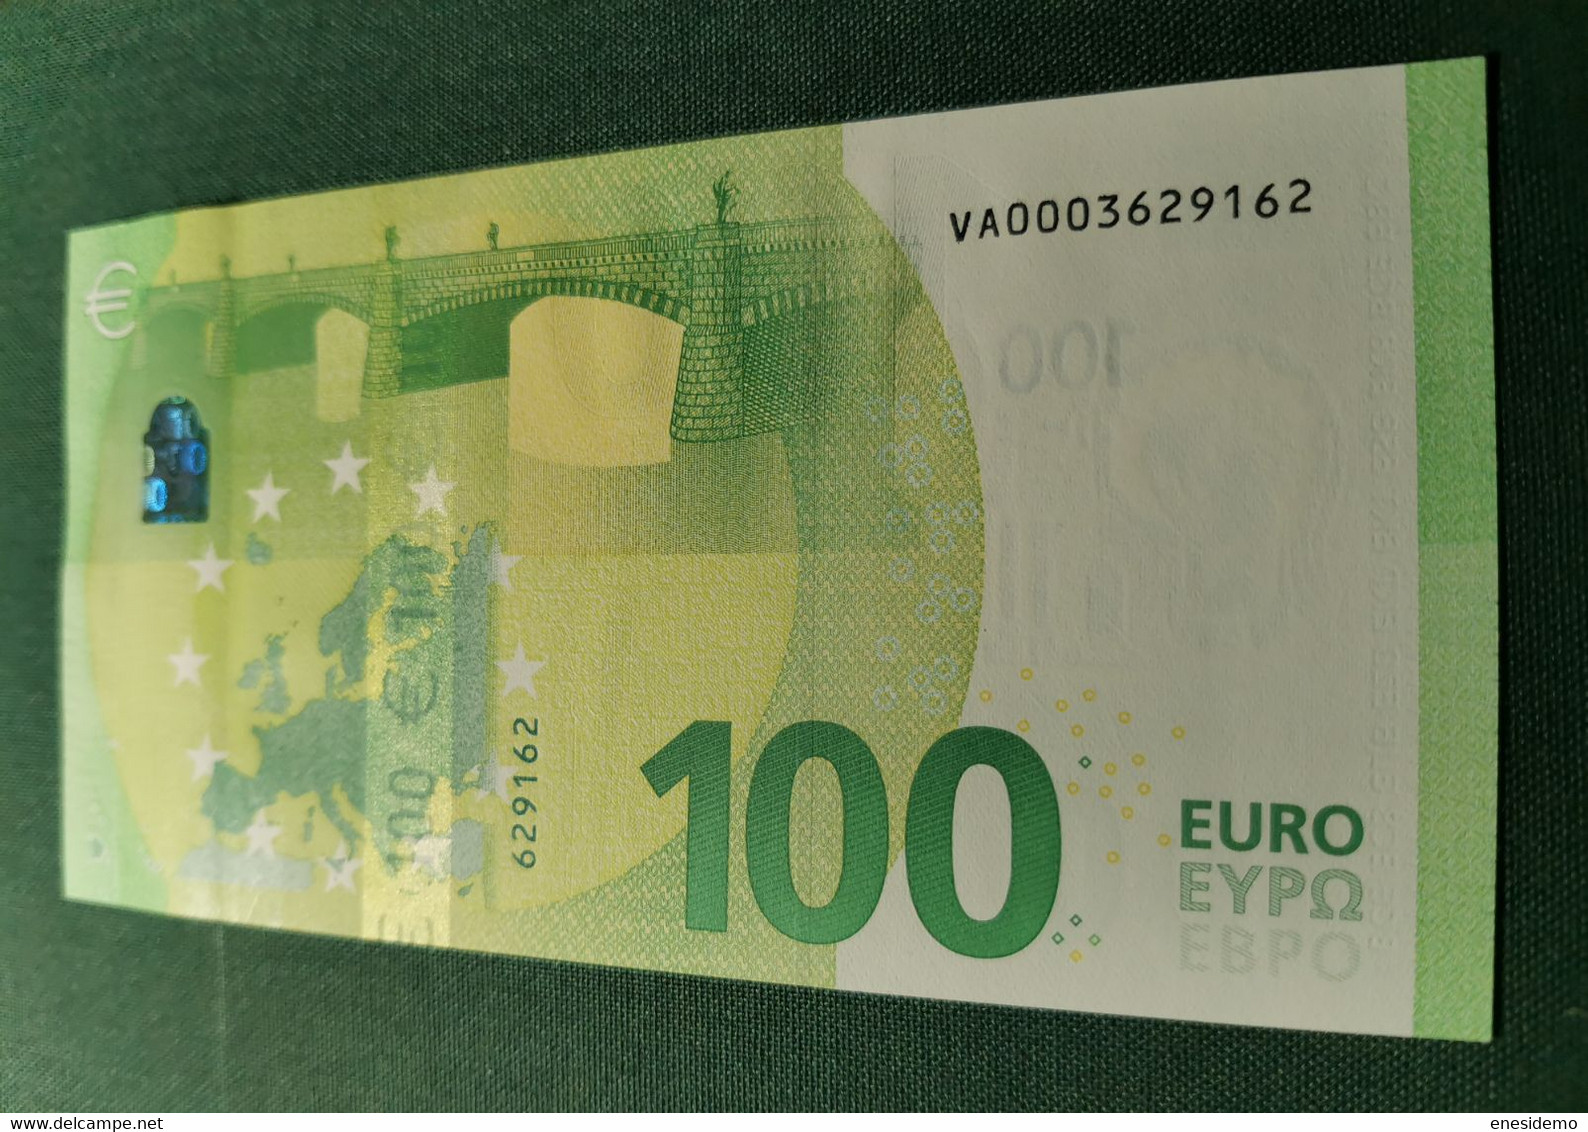 100 EURO SPAIN 2019 DRAGHI V001A2 VA000 LOW SERIAL NUMBER SC FDS UNCIRCULATED  PERFECT